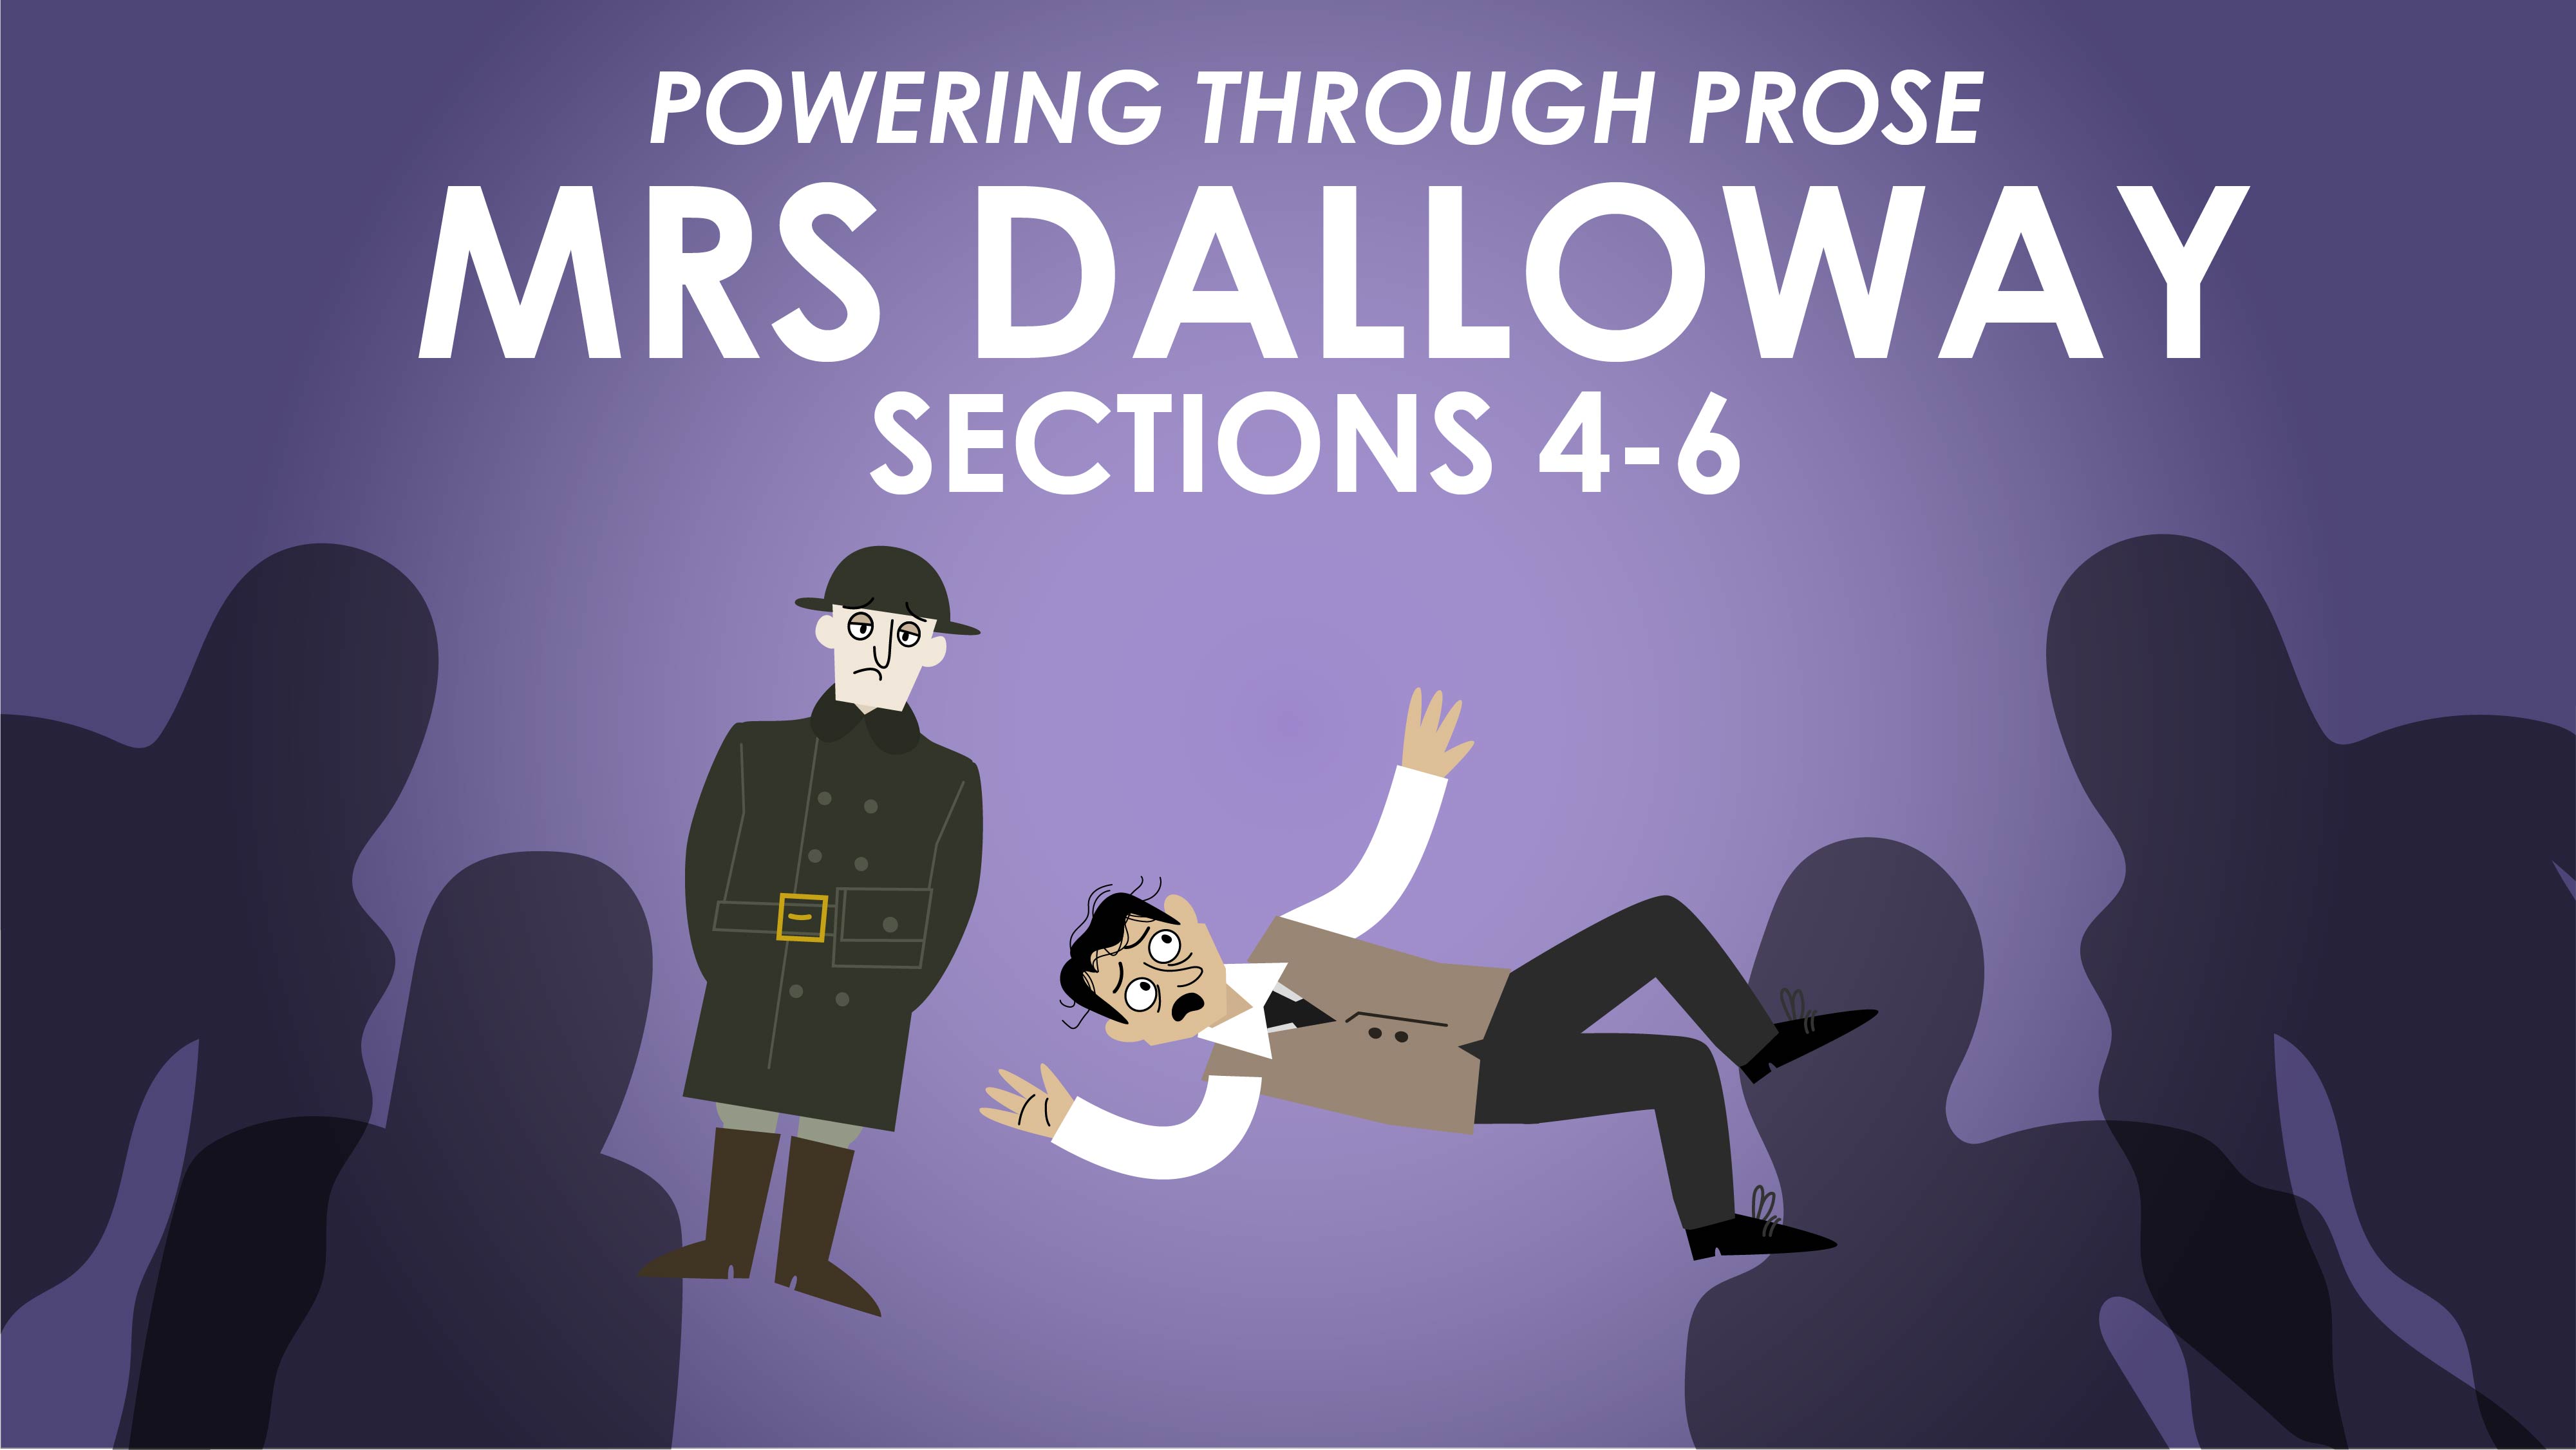 Mrs Dalloway - Virginia Woolf - Sections 4-6 - Powering Through Prose Series